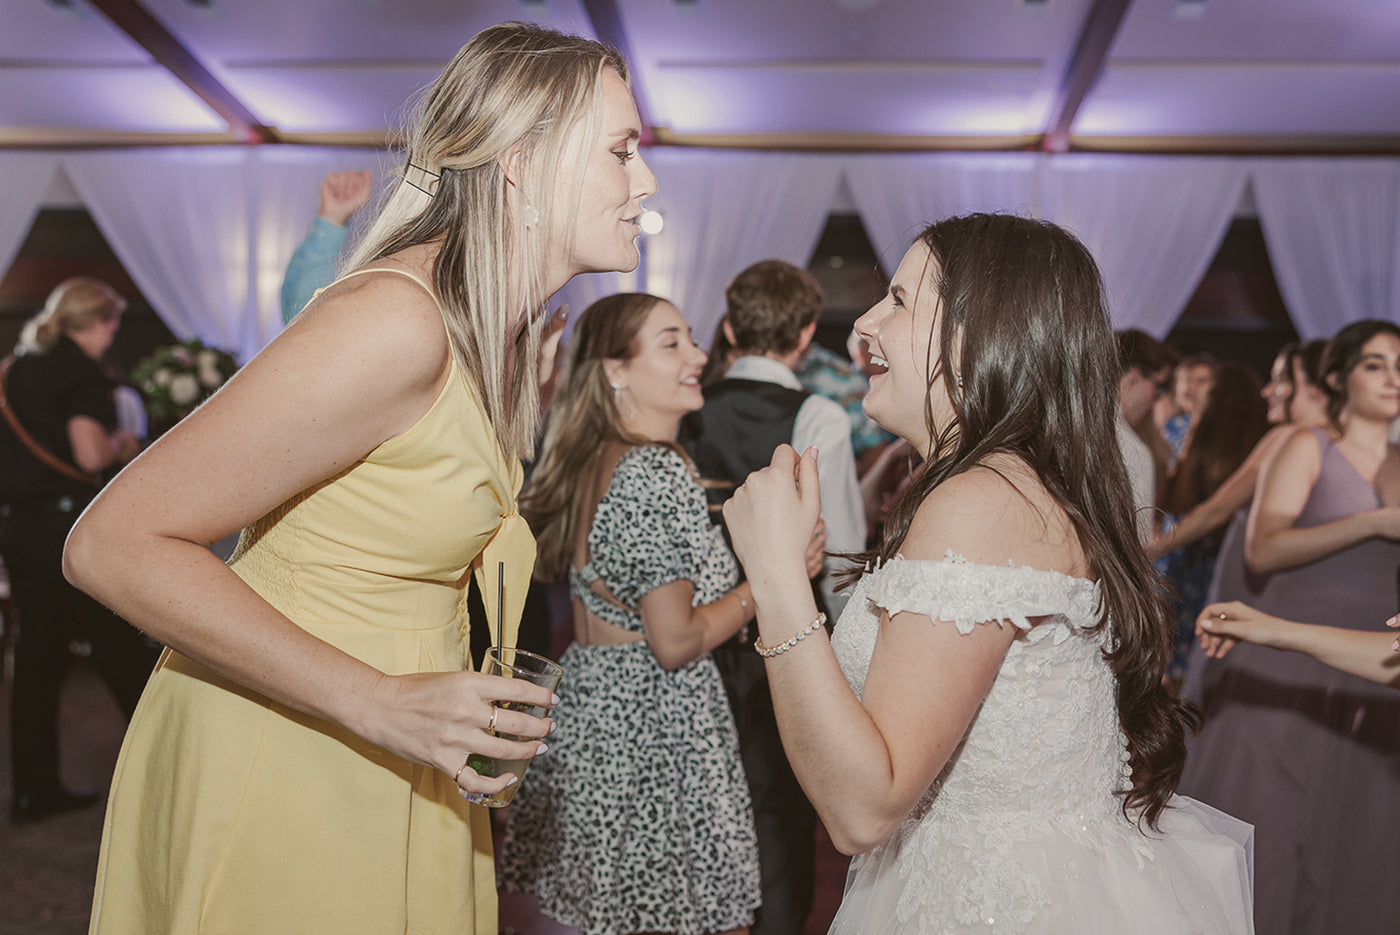 Bride and her friend grinning and dancing together amongst a full dance floor lit in purple